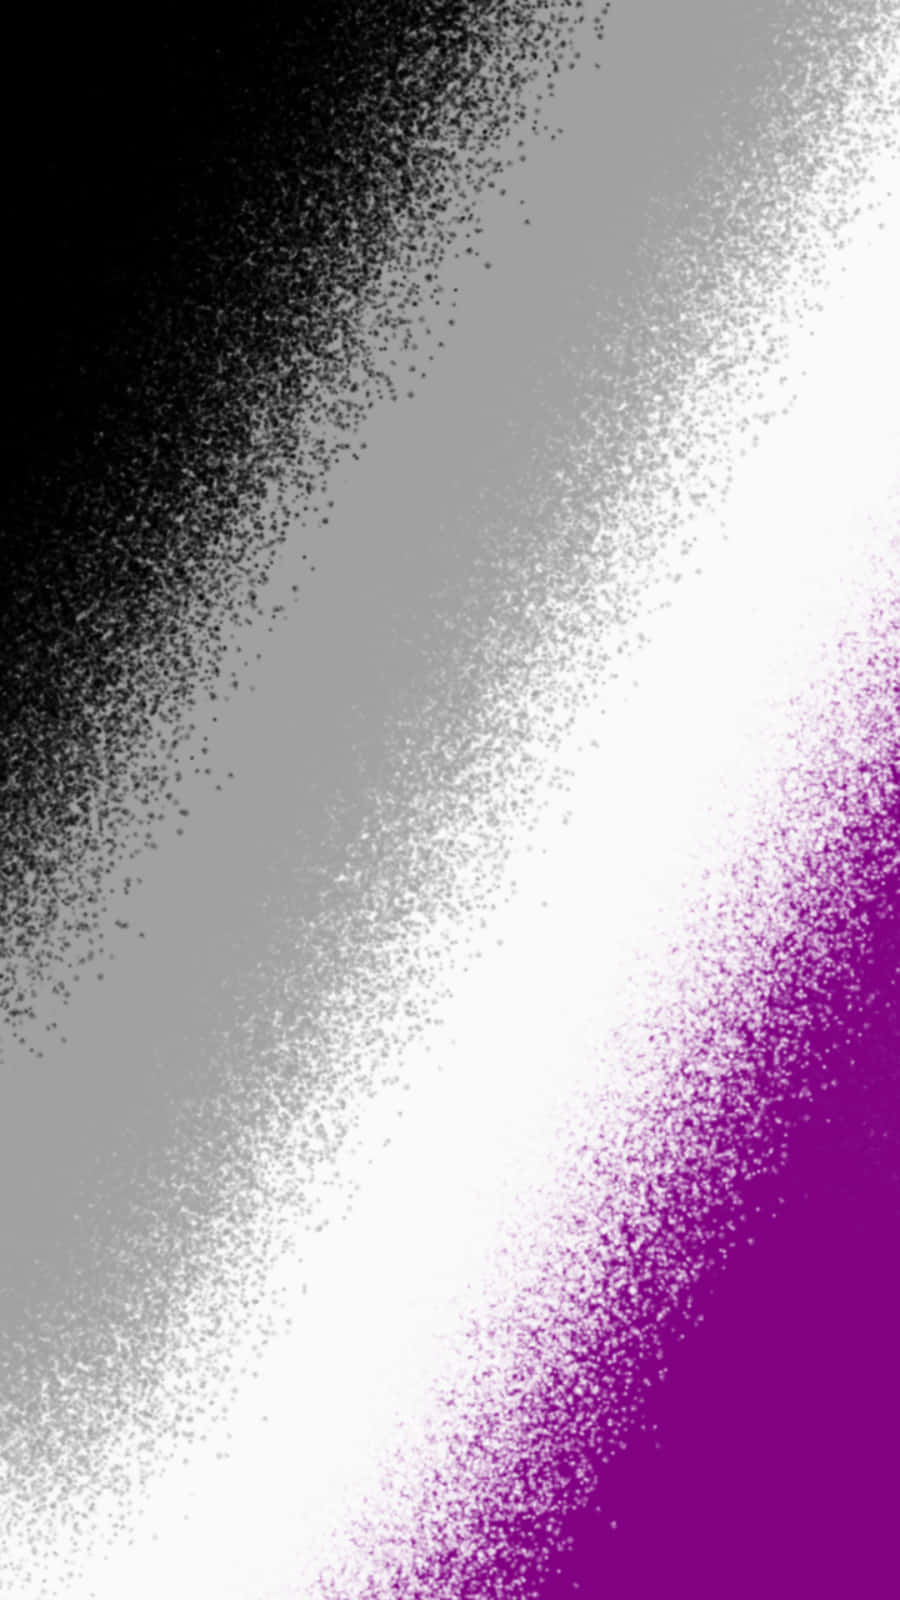 A Purple And Black Background With A Pixelated Effect Wallpaper